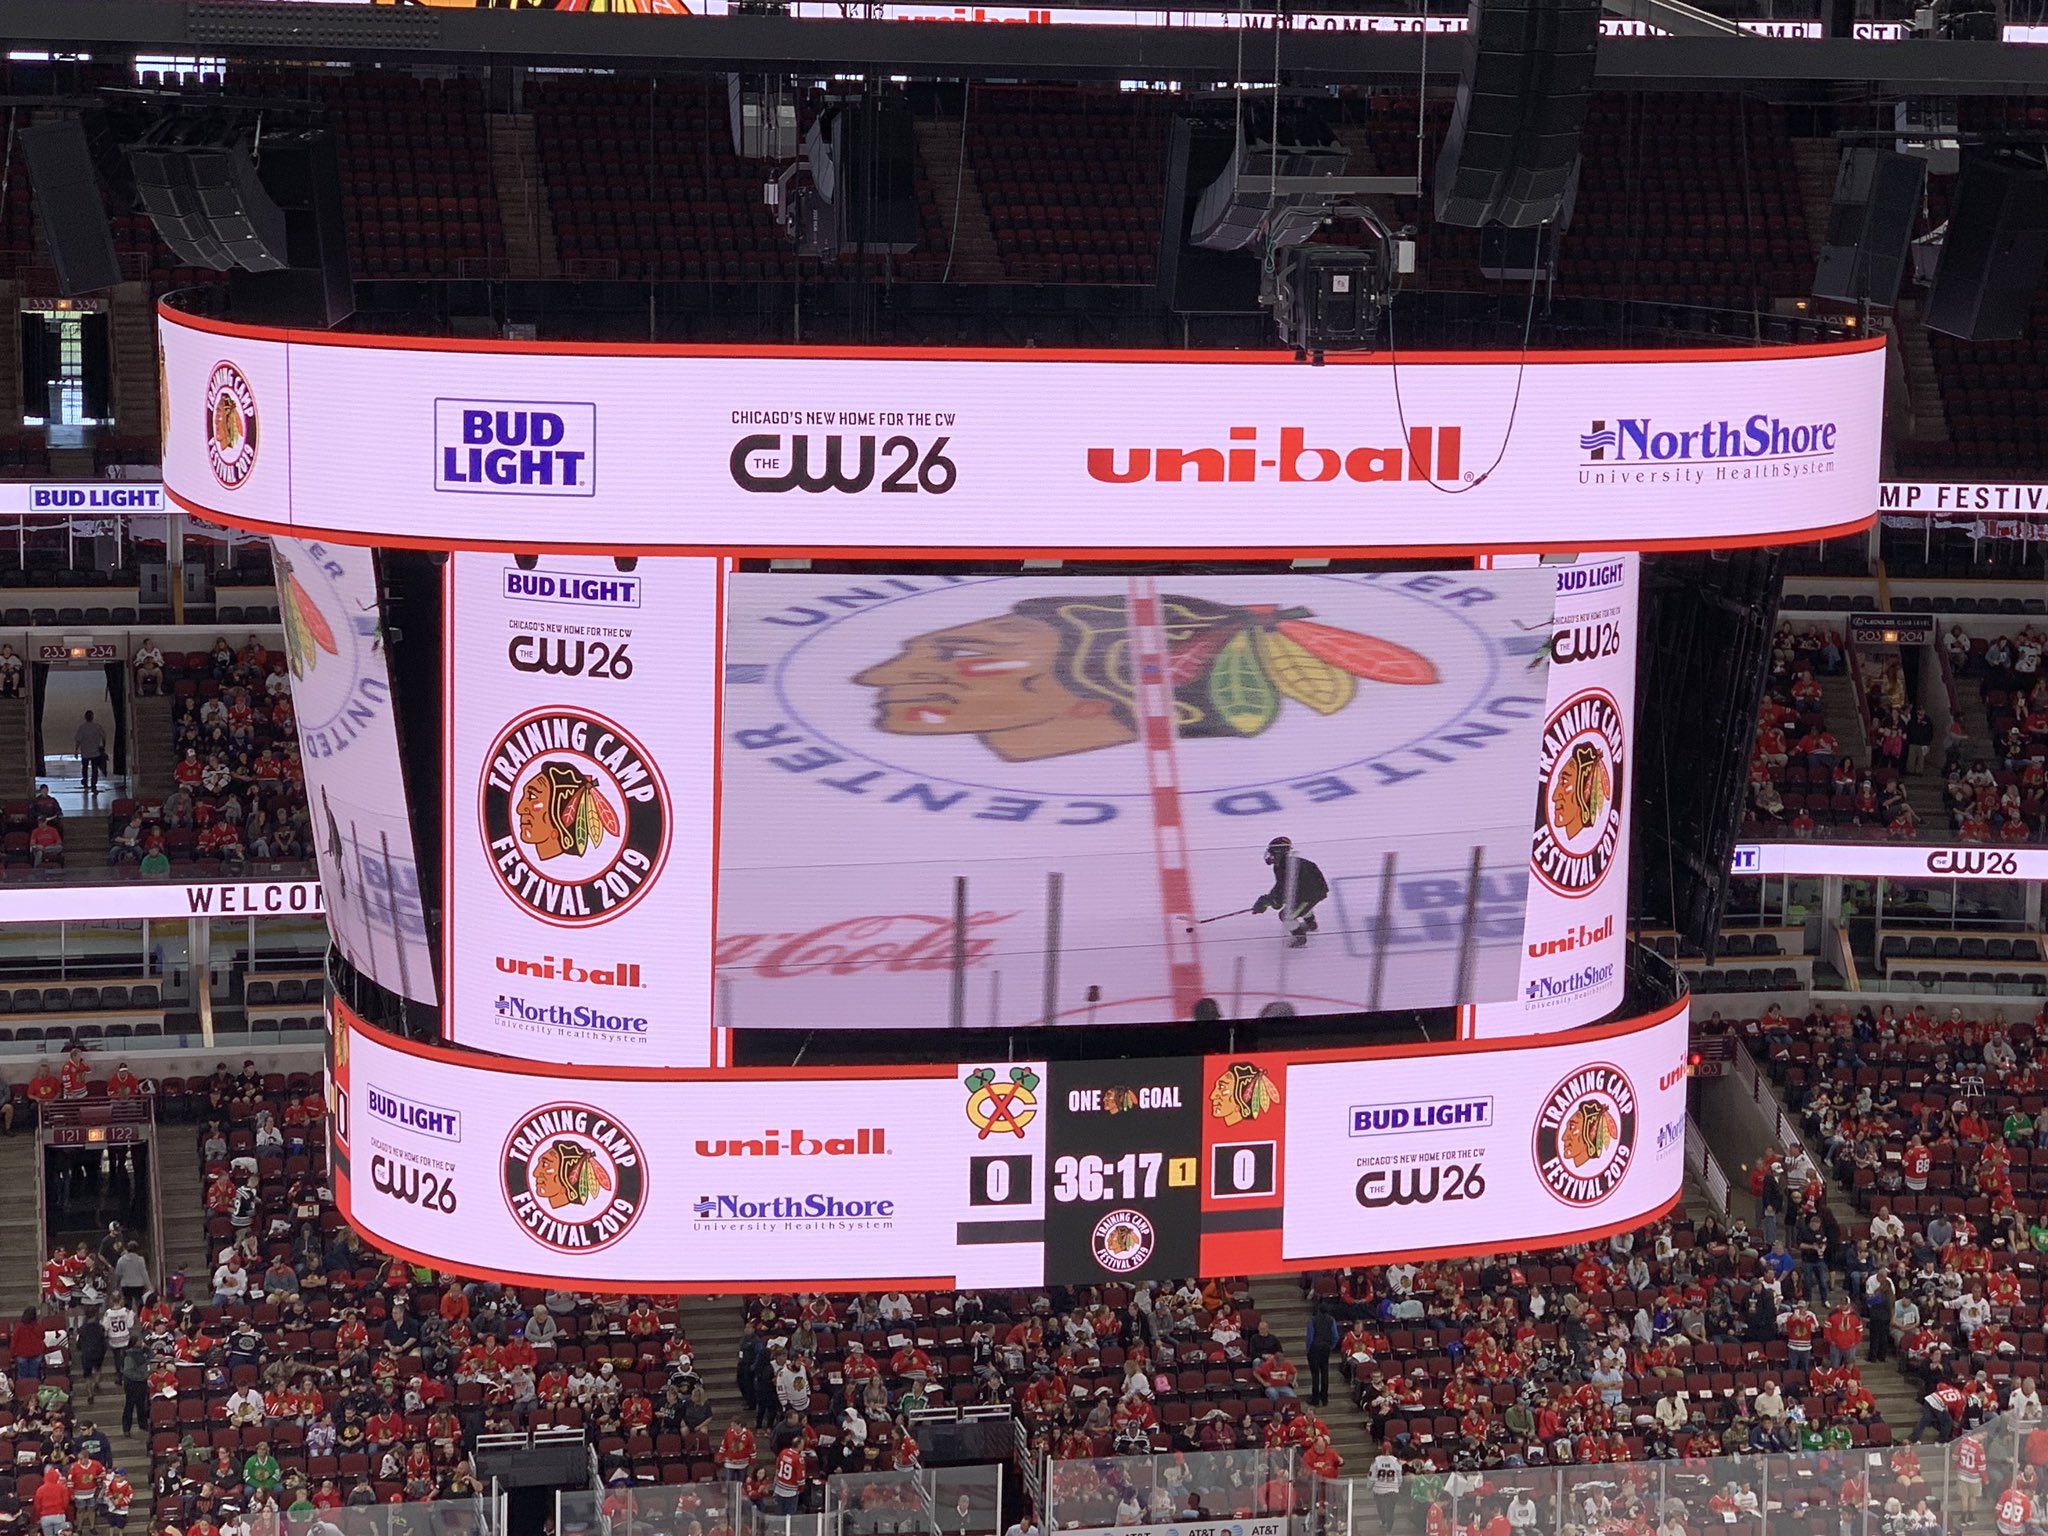 Largest, High Definition, In-Arena Center-Hung Scoreboard in the